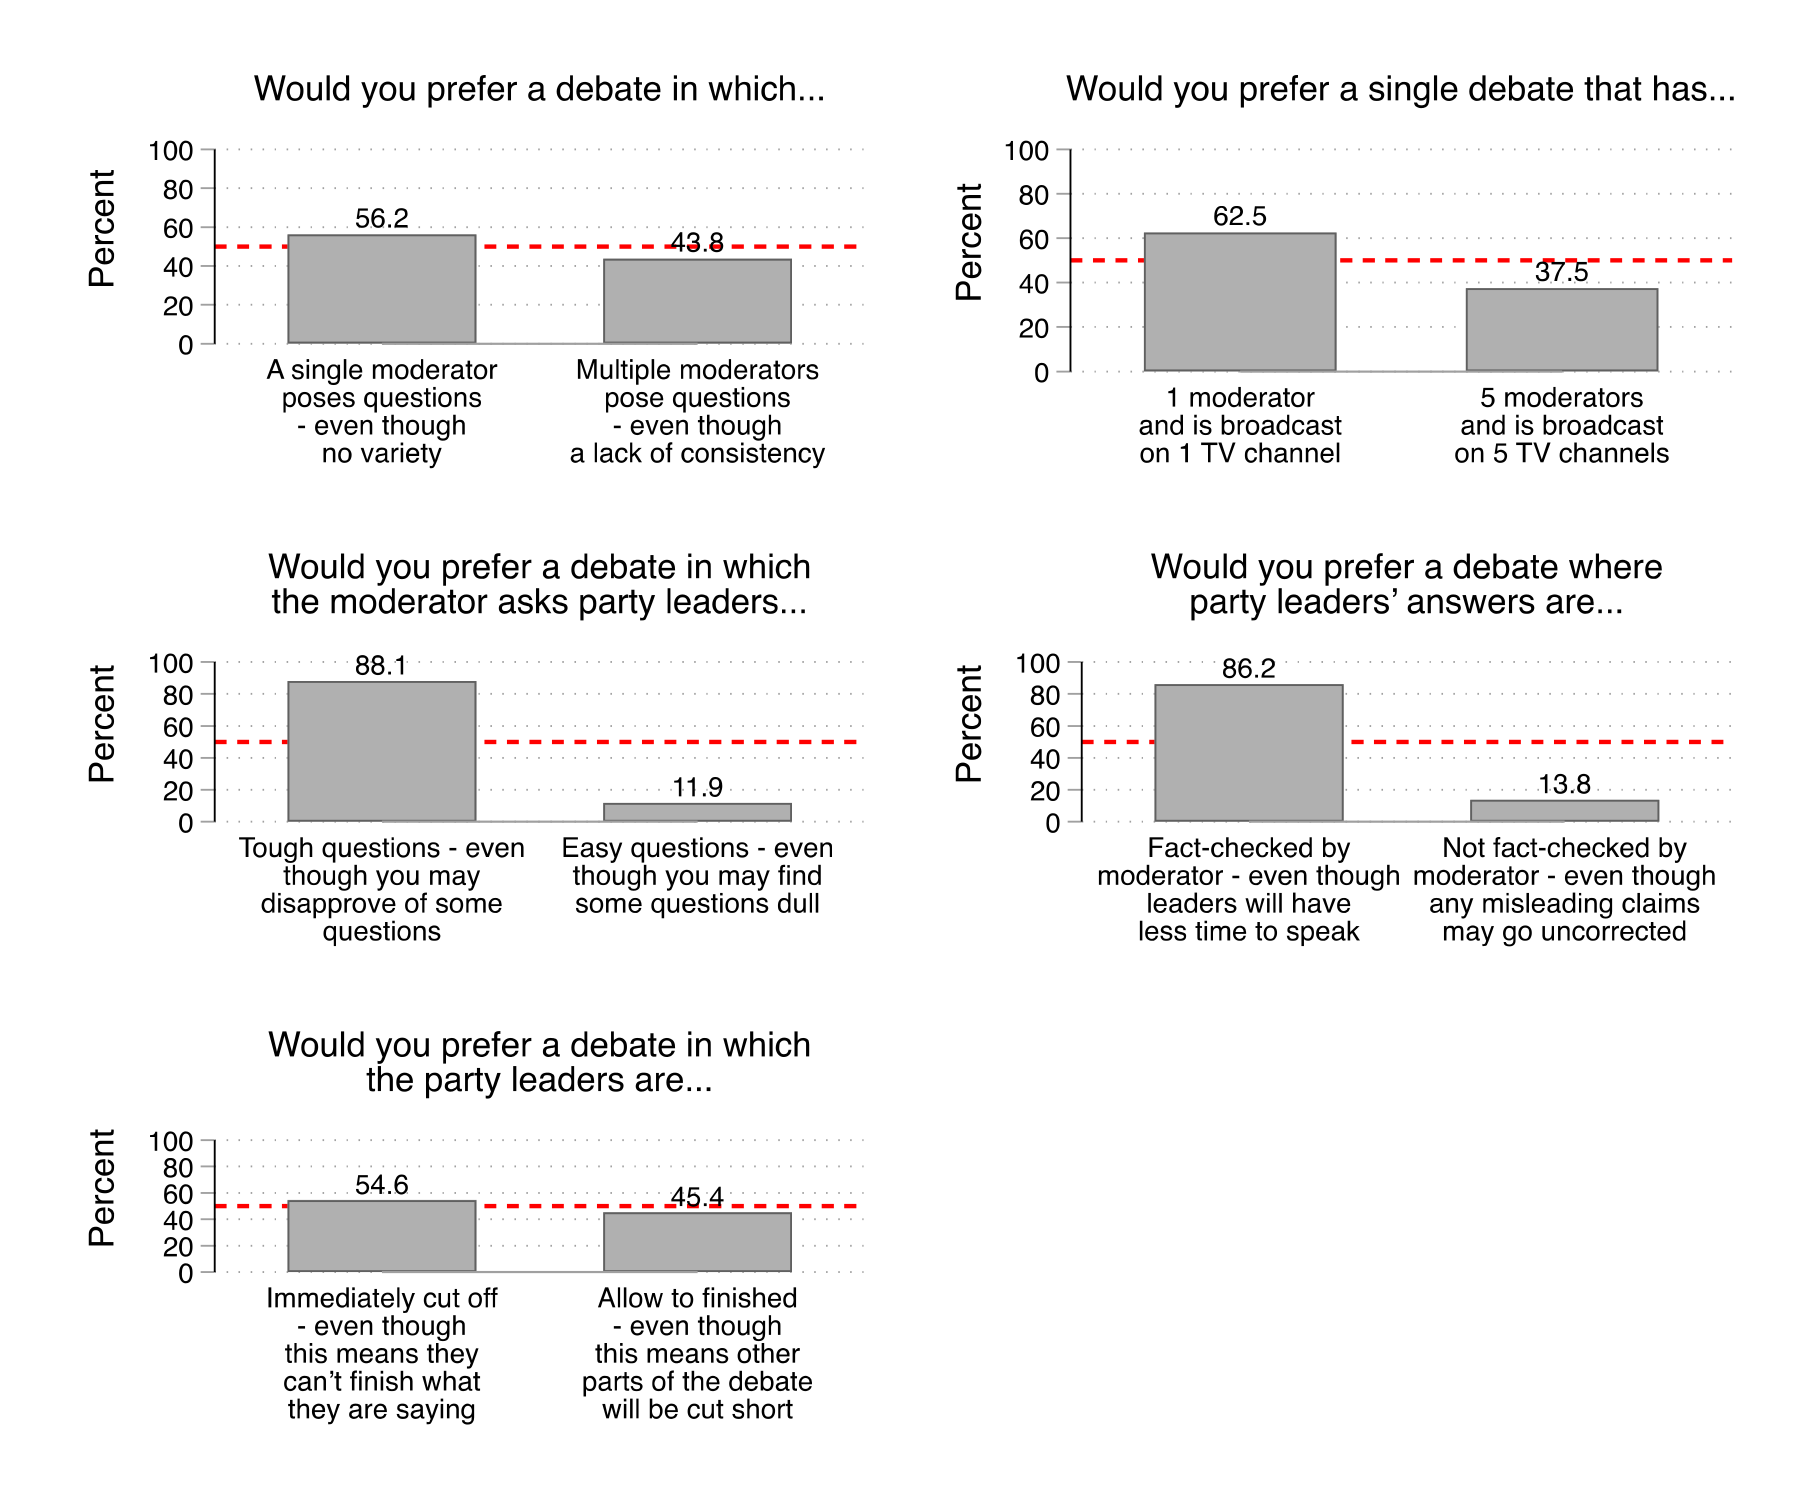 Figure 32. This figure shows participants' binary preferences regarding debate moderation. For example, a large majority of participants (88%) preferred a debate in which the moderator asked tough questions - even though this means you may disapprove of some of the moderator's questions to a debate where the moderator asked easy questions - even though this means you may find some of the moderator's questions dull. 